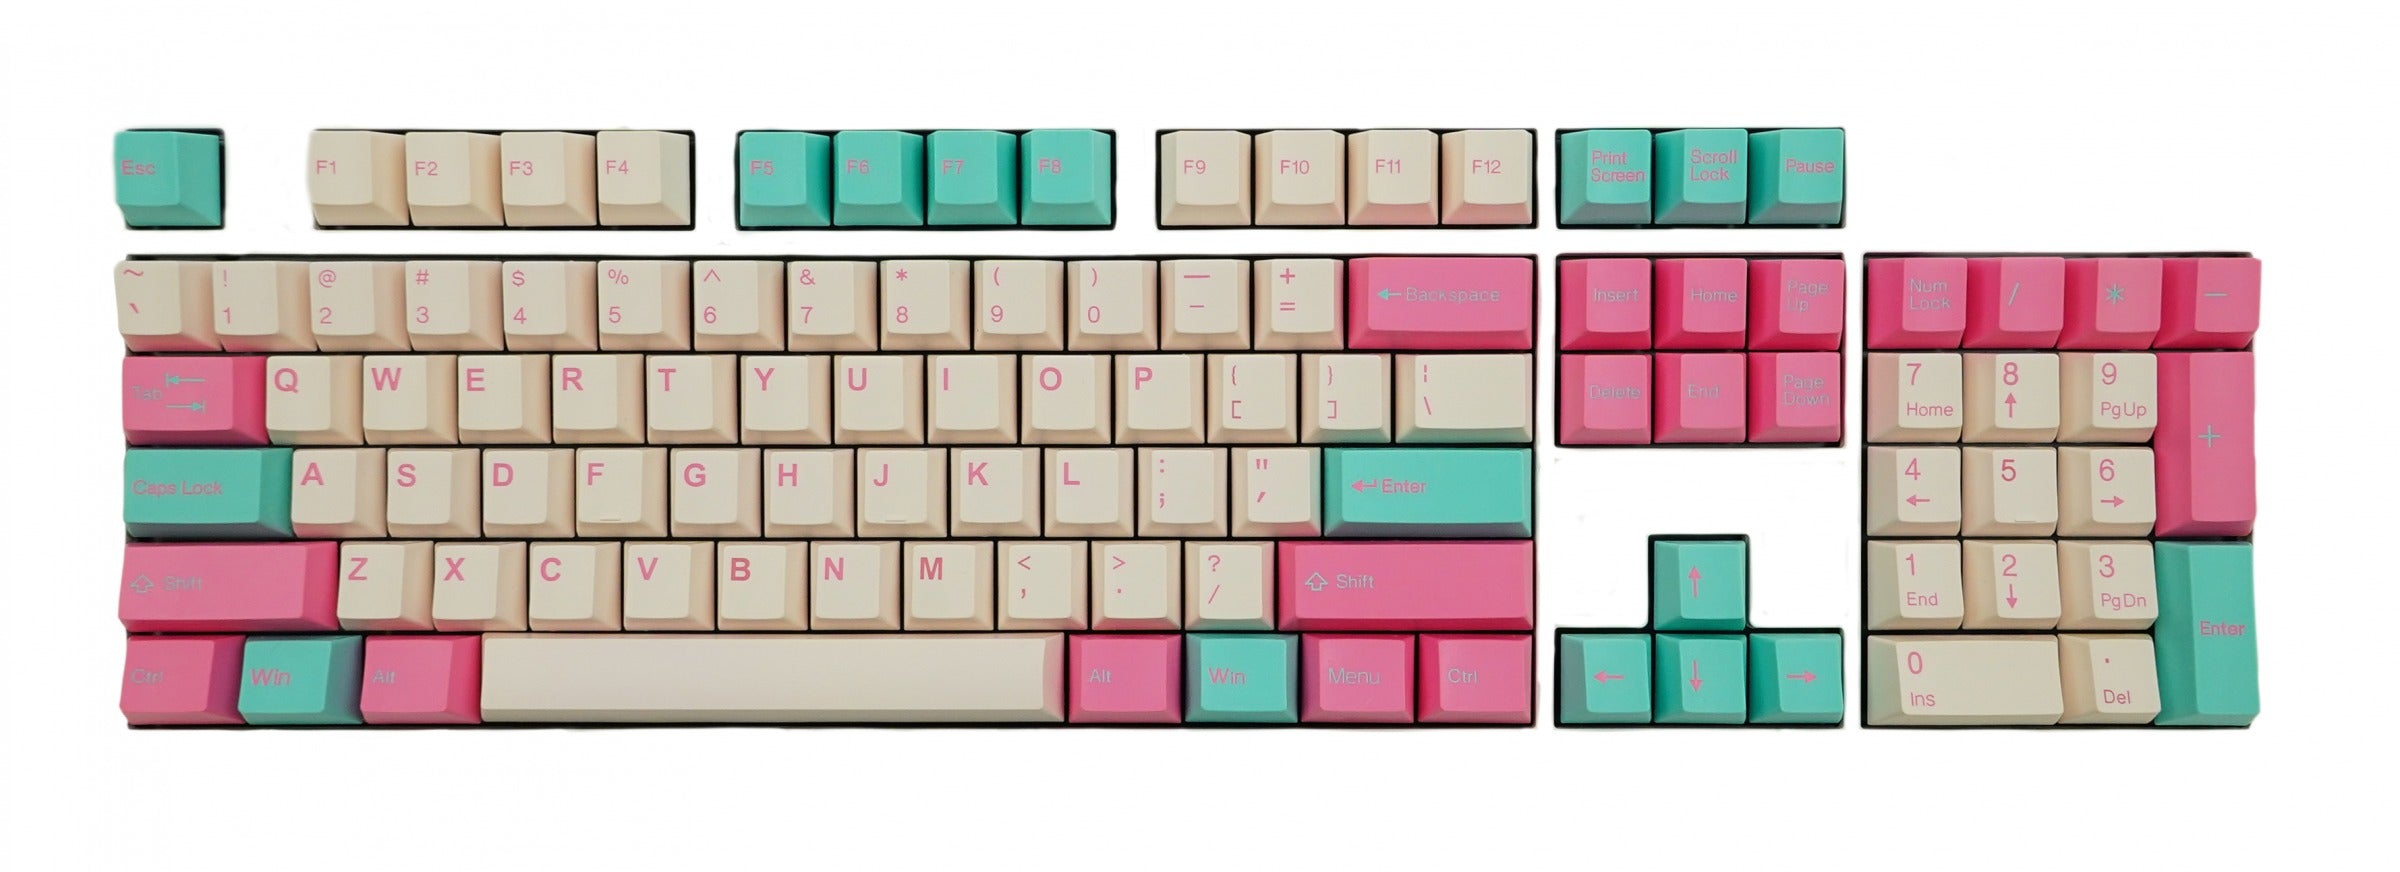 Tai-Hao 104 Key ABS Double Shot Cubic Keycap Set Miami Surf MKG0DIILY7 |0|